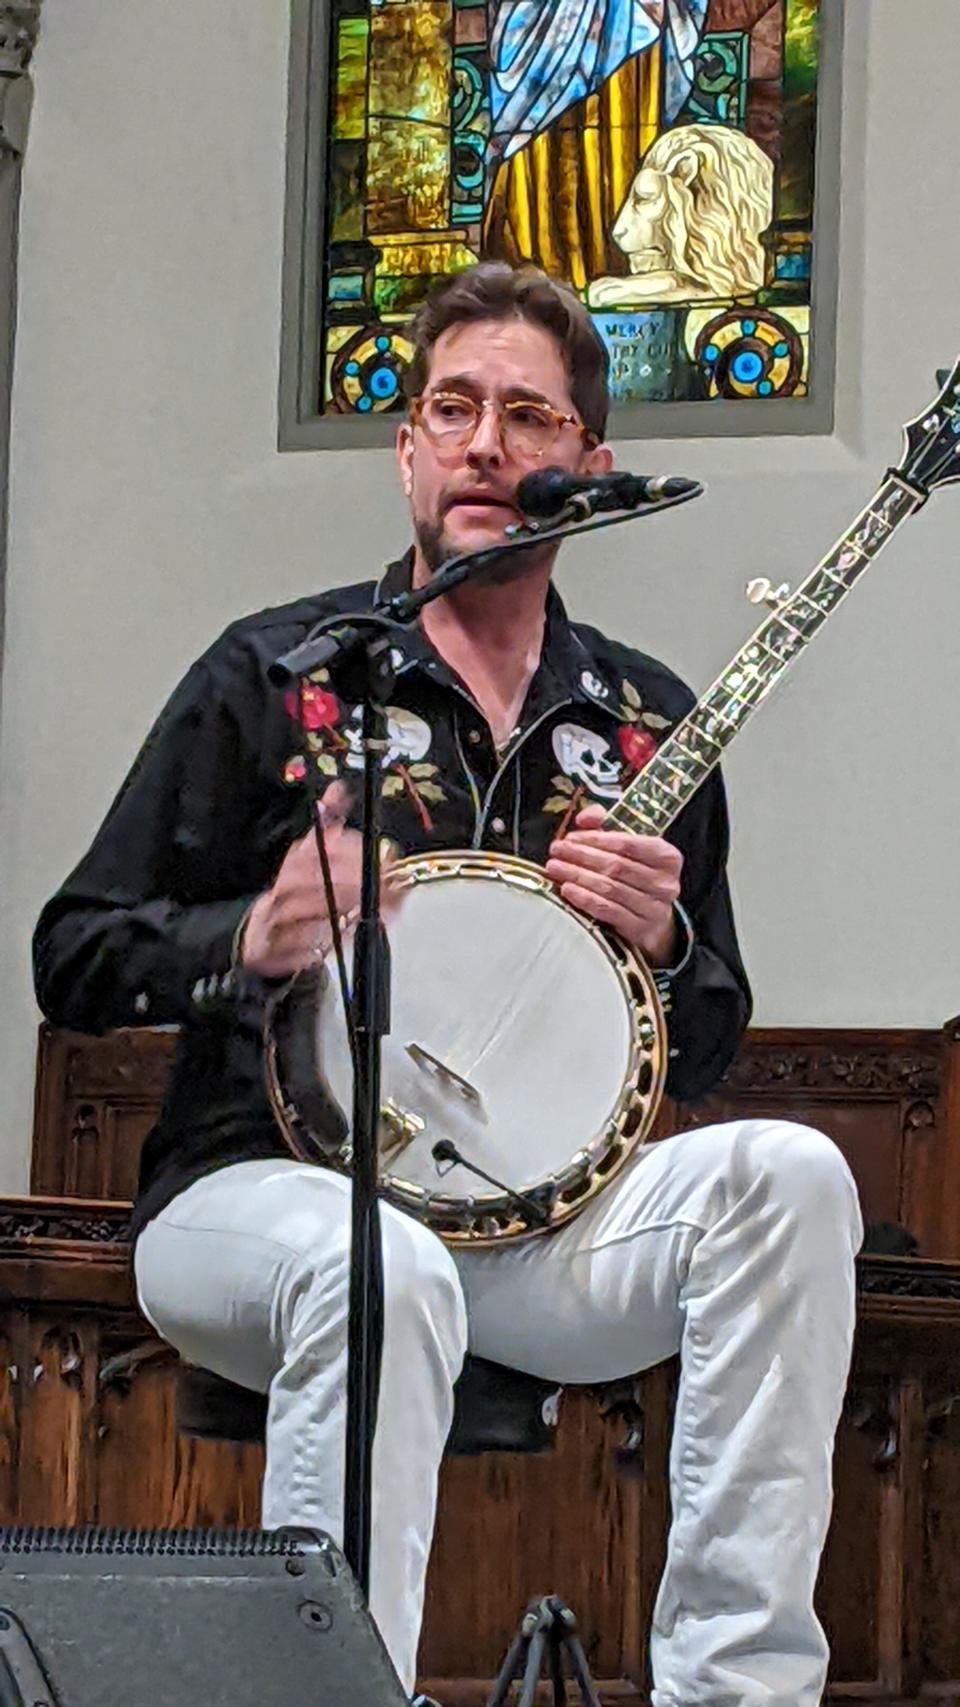 Joe Troop performs at St. John's Cathedral in Knoxville.